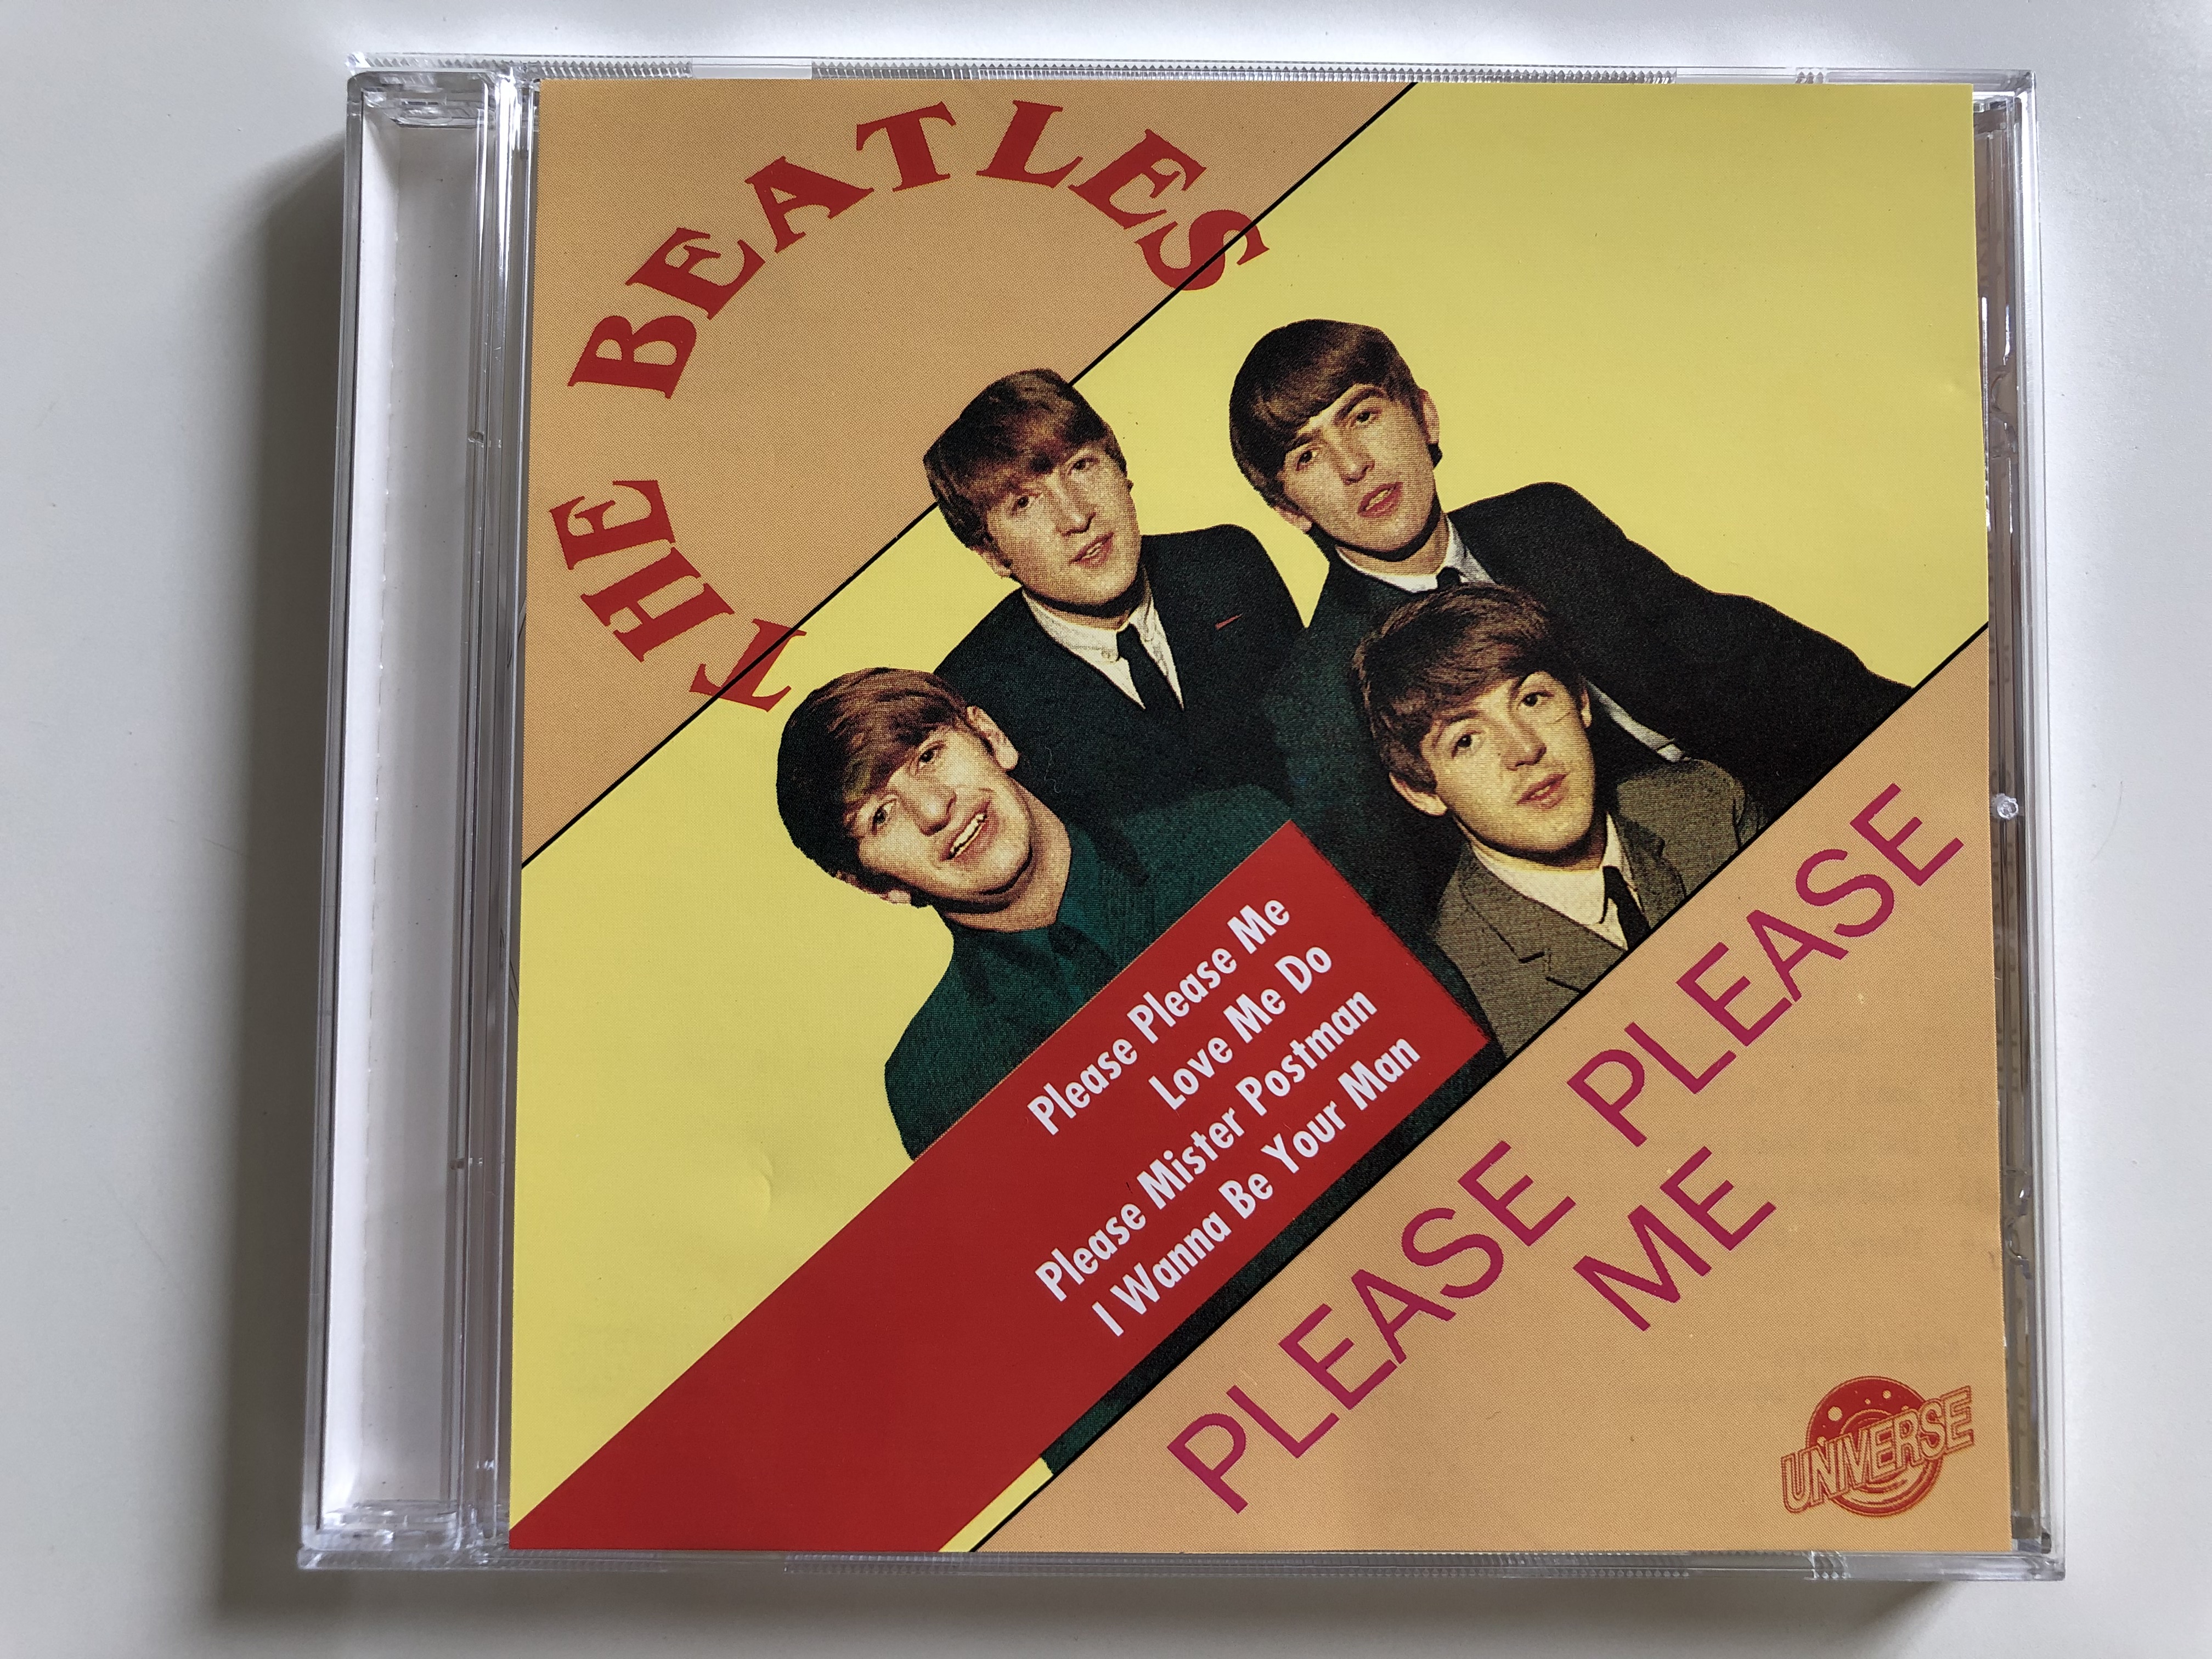 the-beatles-please-please-me-love-me-do-misery-till-there-was-you-hold-me-tight-audio-cd-1992-un-4-017-1-.jpg